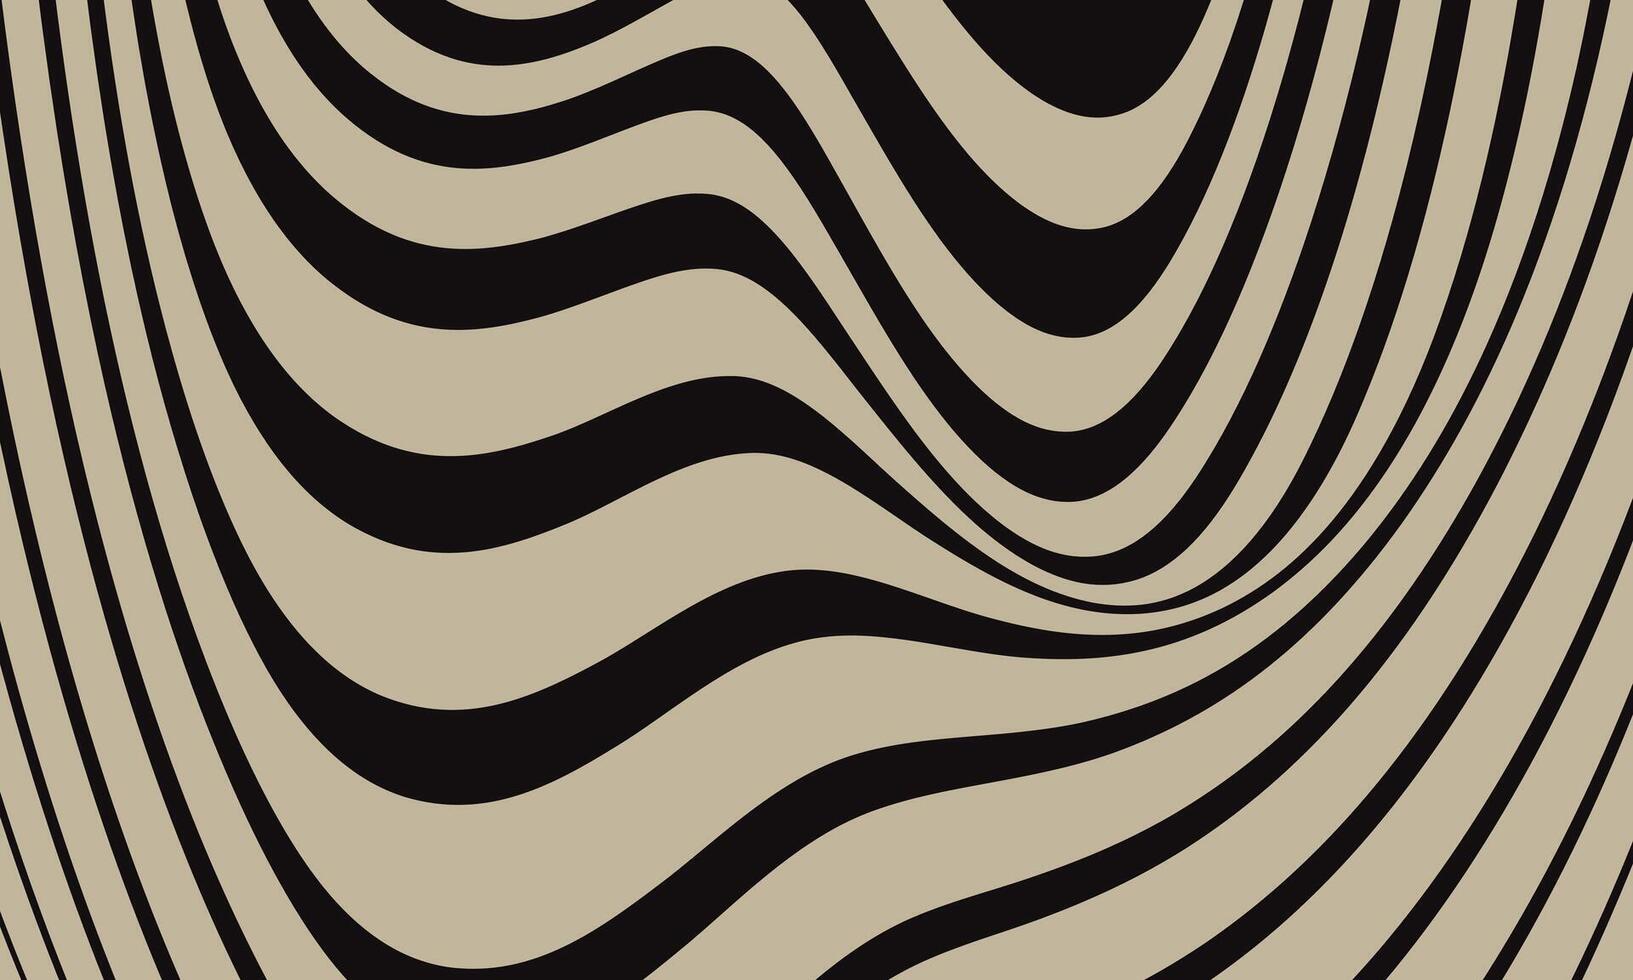 abstract line pattern. vector